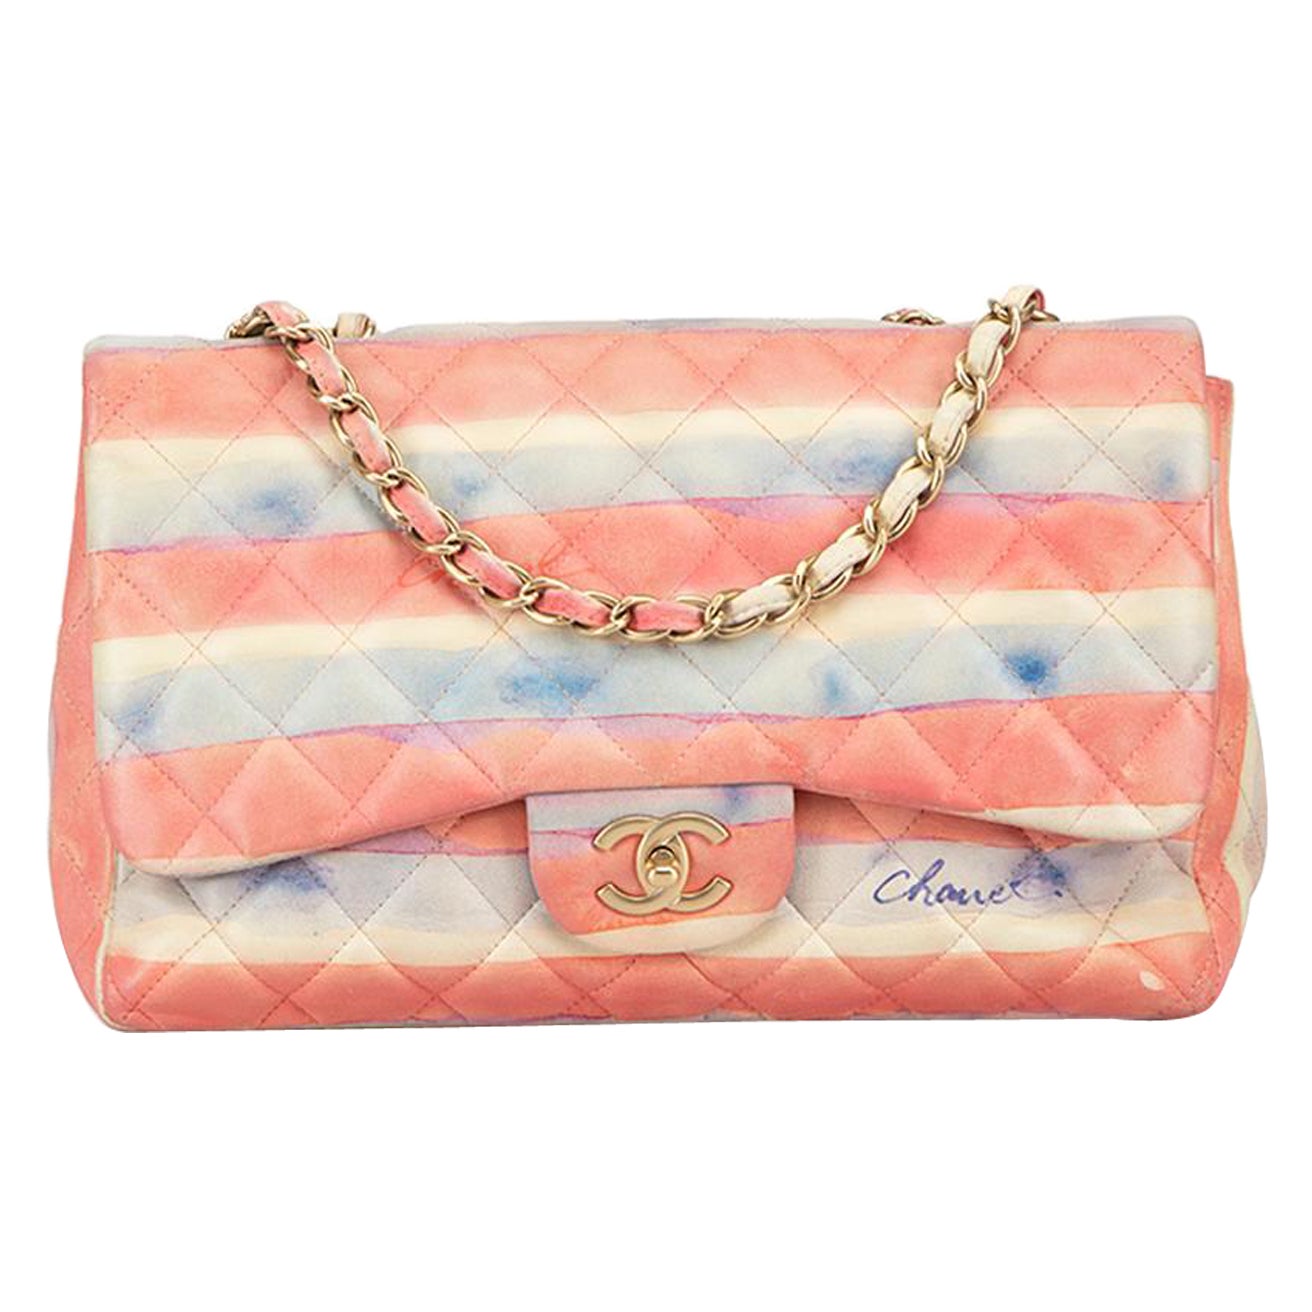 Chanel Watercolor Bag - 7 For Sale on 1stDibs